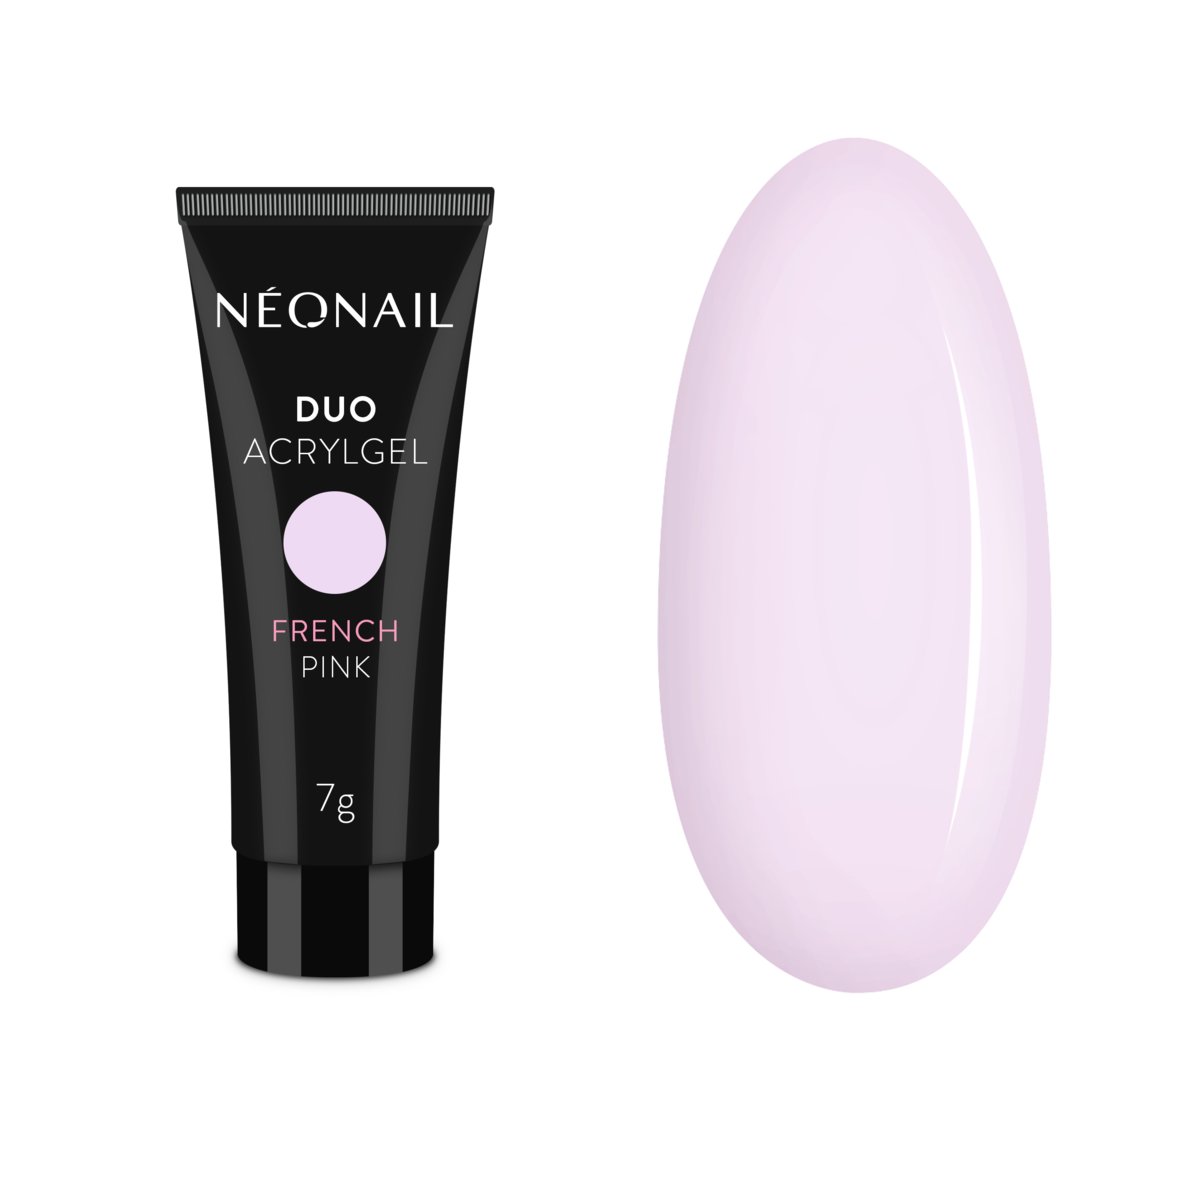 Neonail Duo Acrylgel FRENCH PINK 7 g 6104